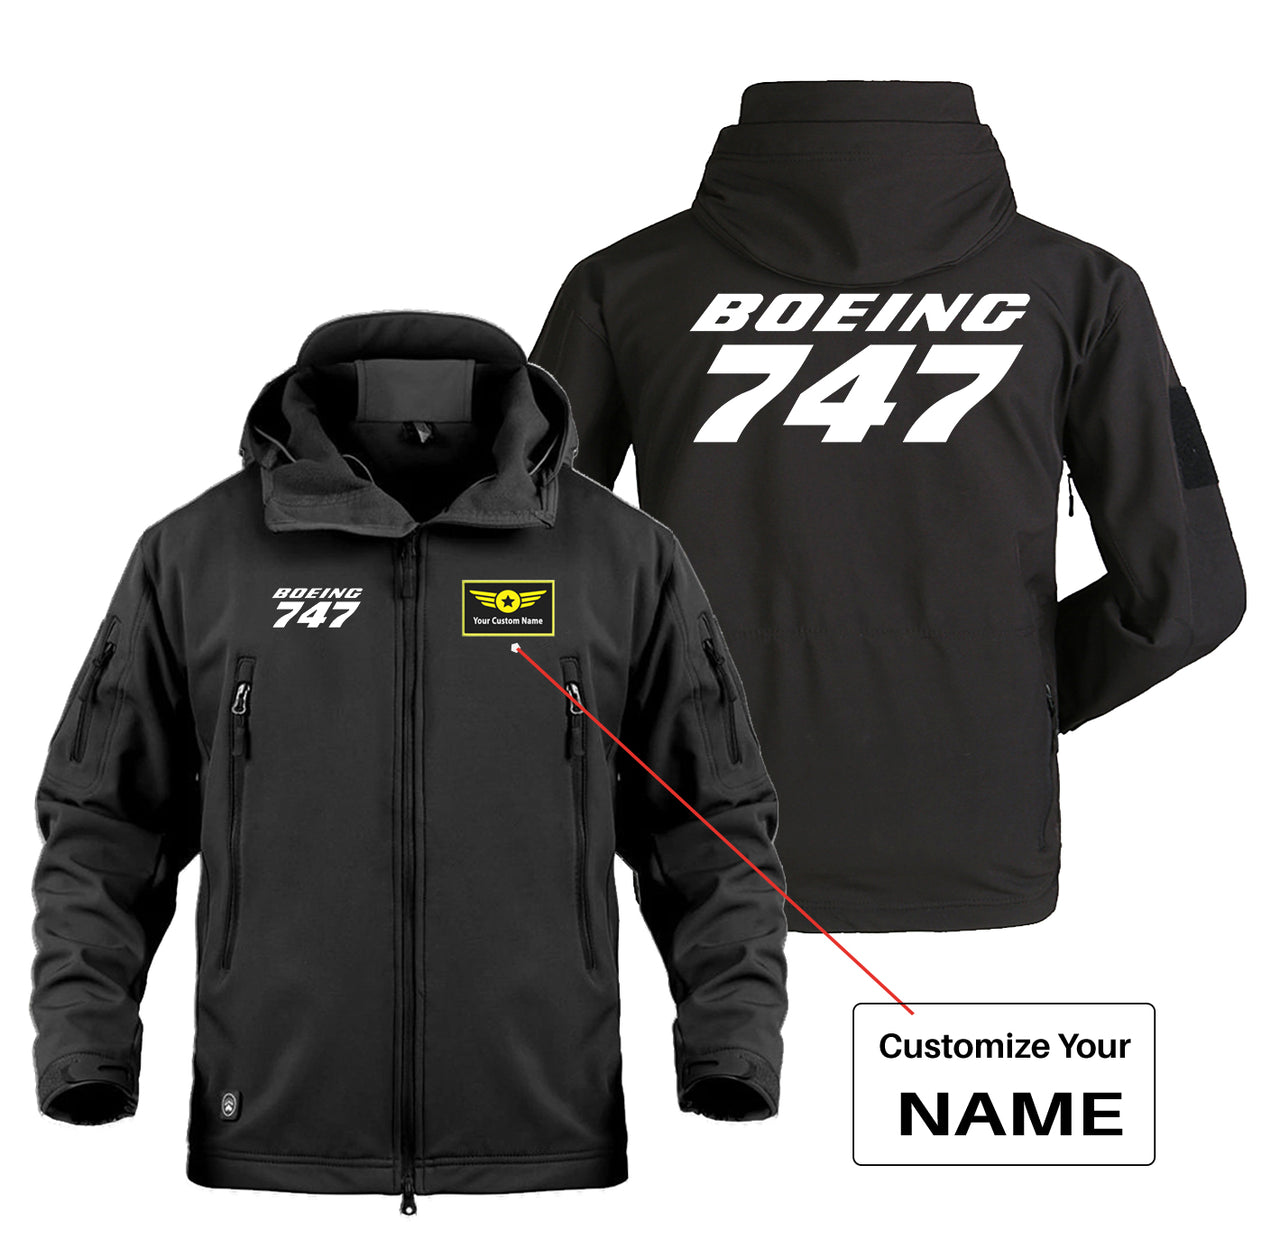 Boeing 747 & Text Designed Military Jackets (Customizable)